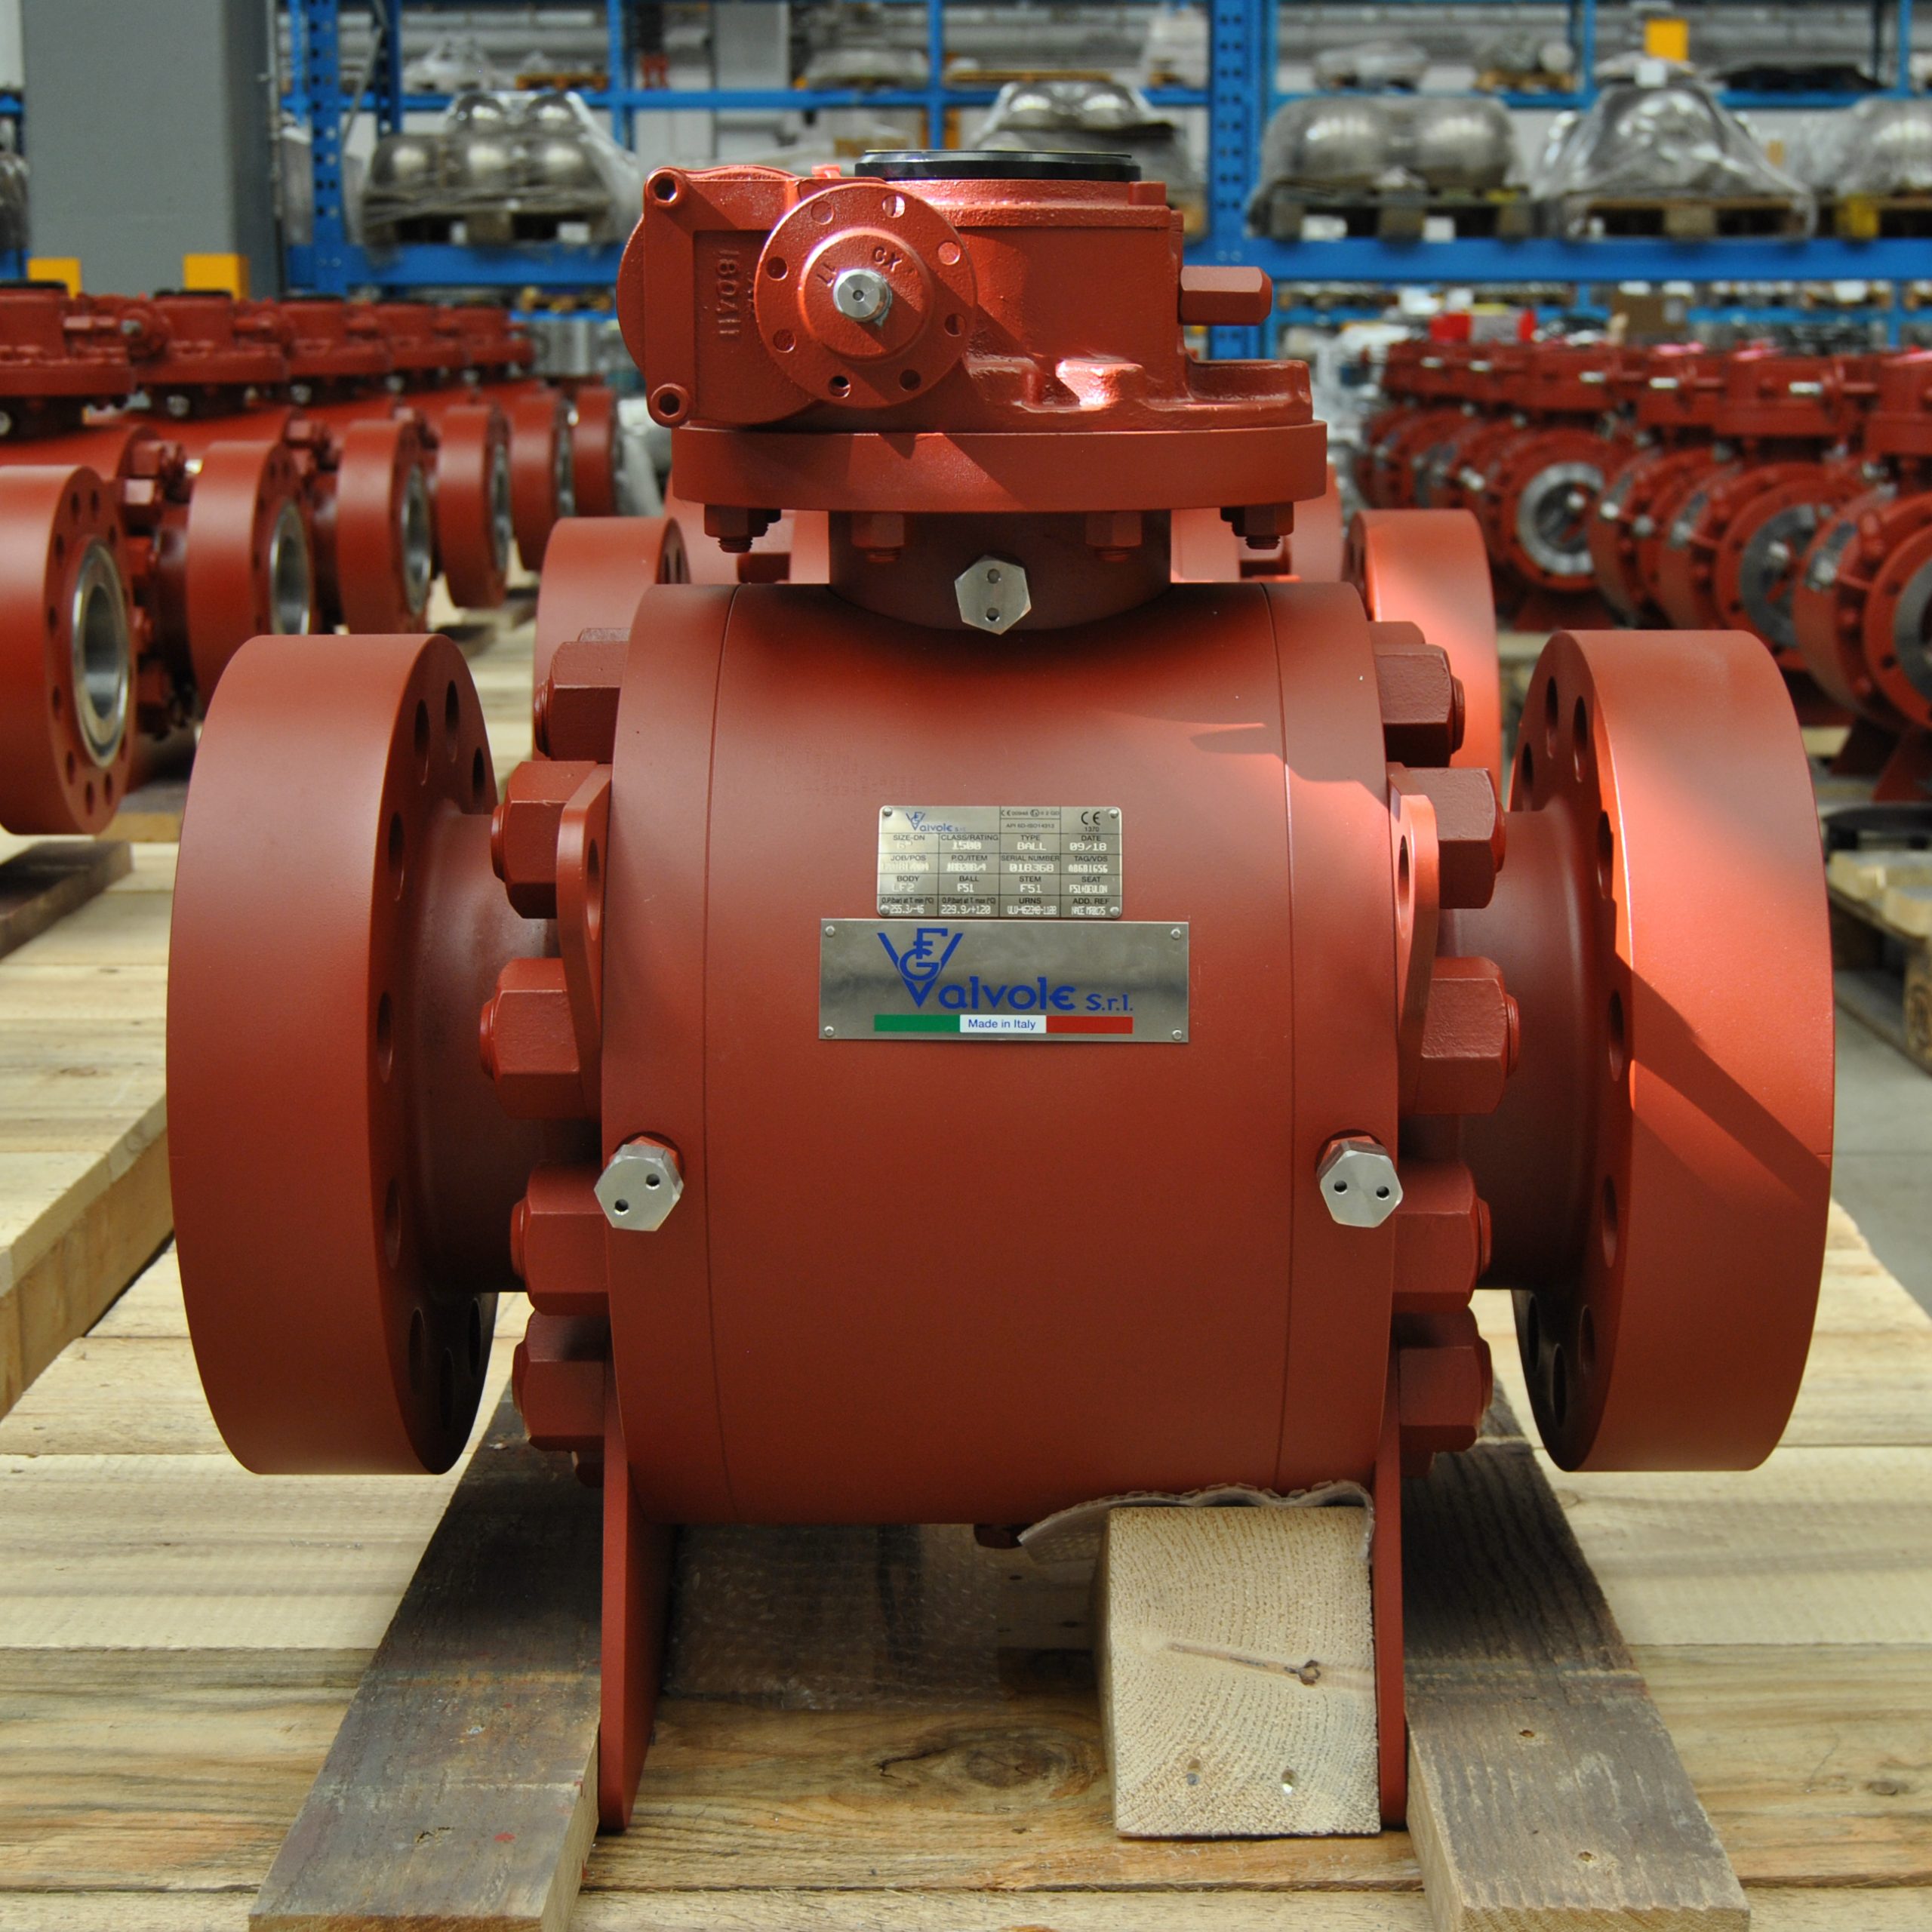 FG Valvole - FG Valvole opened in February as a Ball Valves manufacturer